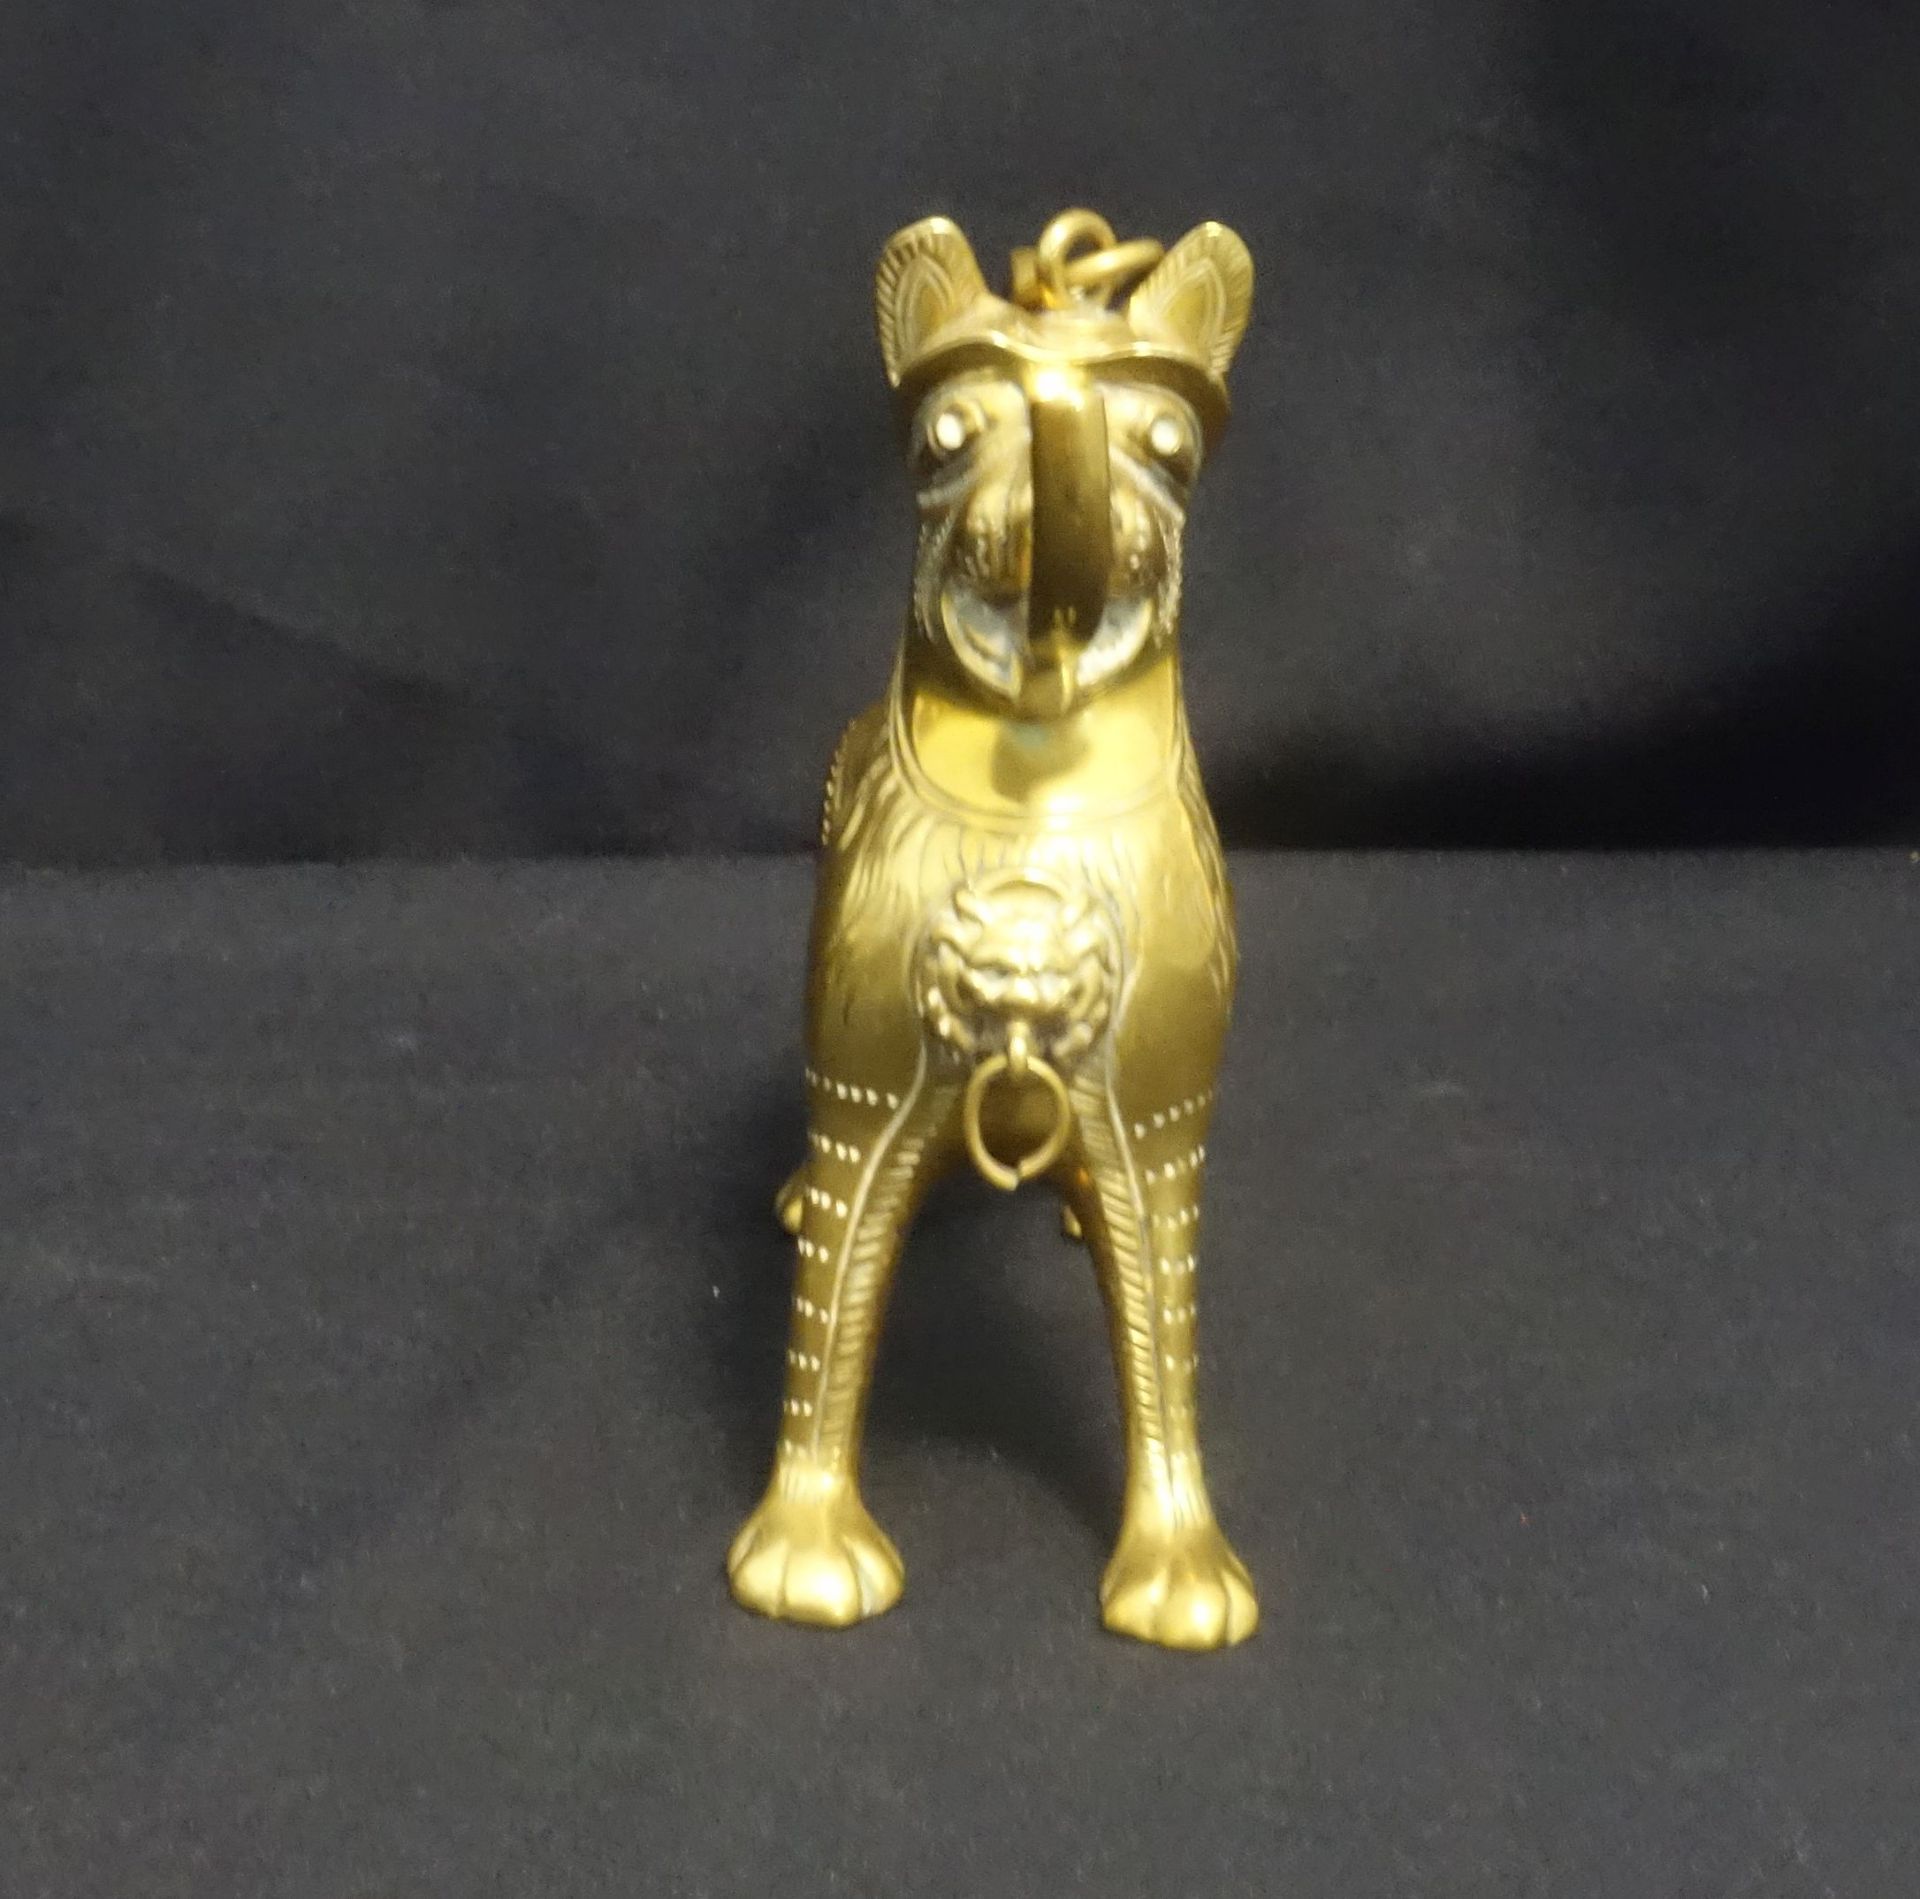 OIL LAMP "LION" - Image 2 of 3